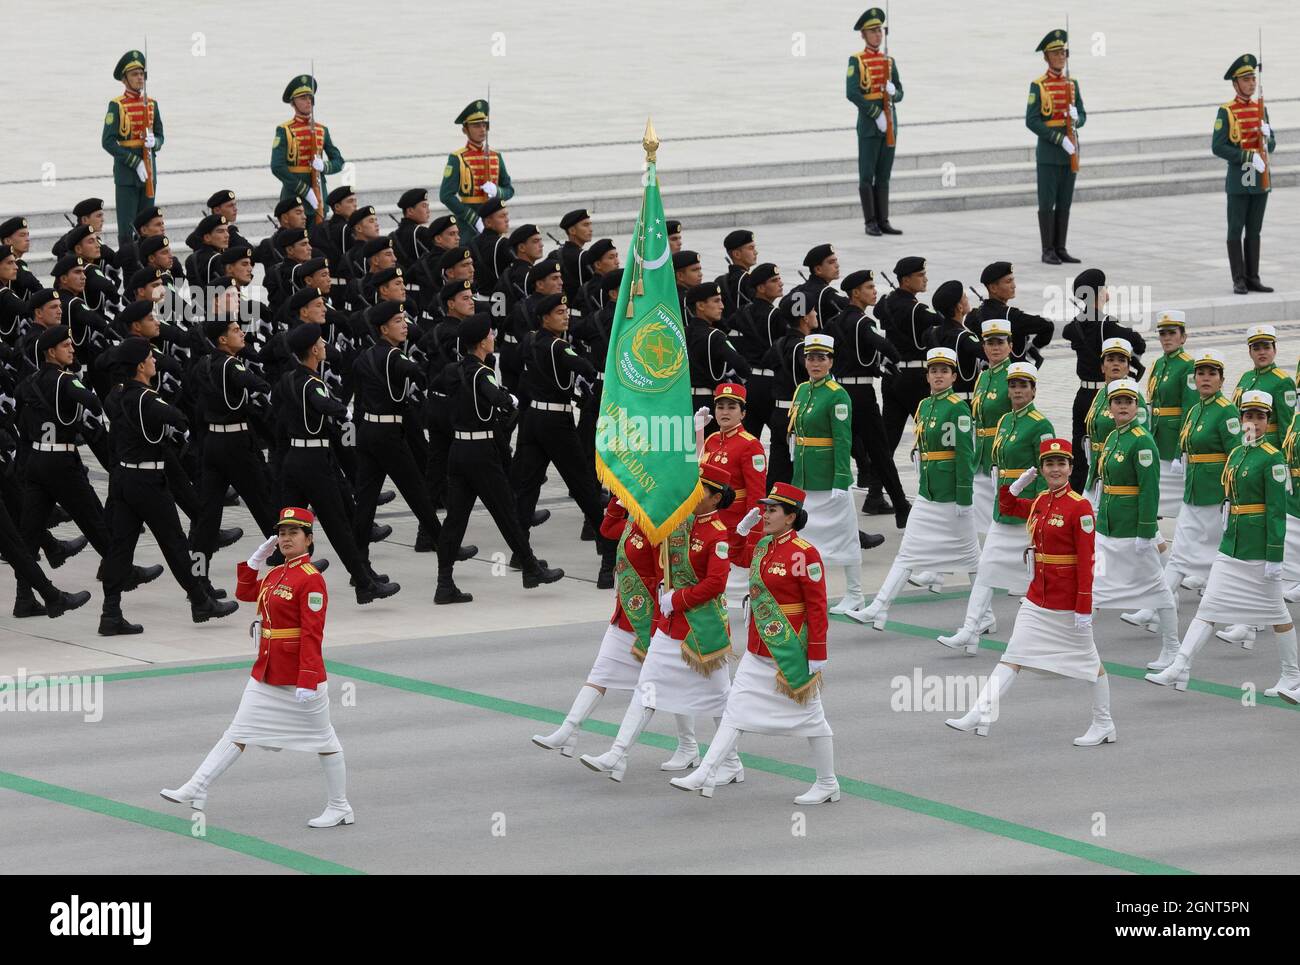 Troops march at a parade marking the Independence Day in Ashgabat, Turkmenistan September 27, 2021. REUTERS/Vyacheslav Sarkisyan REFILE- QUALITY REPEAT Stock Photo